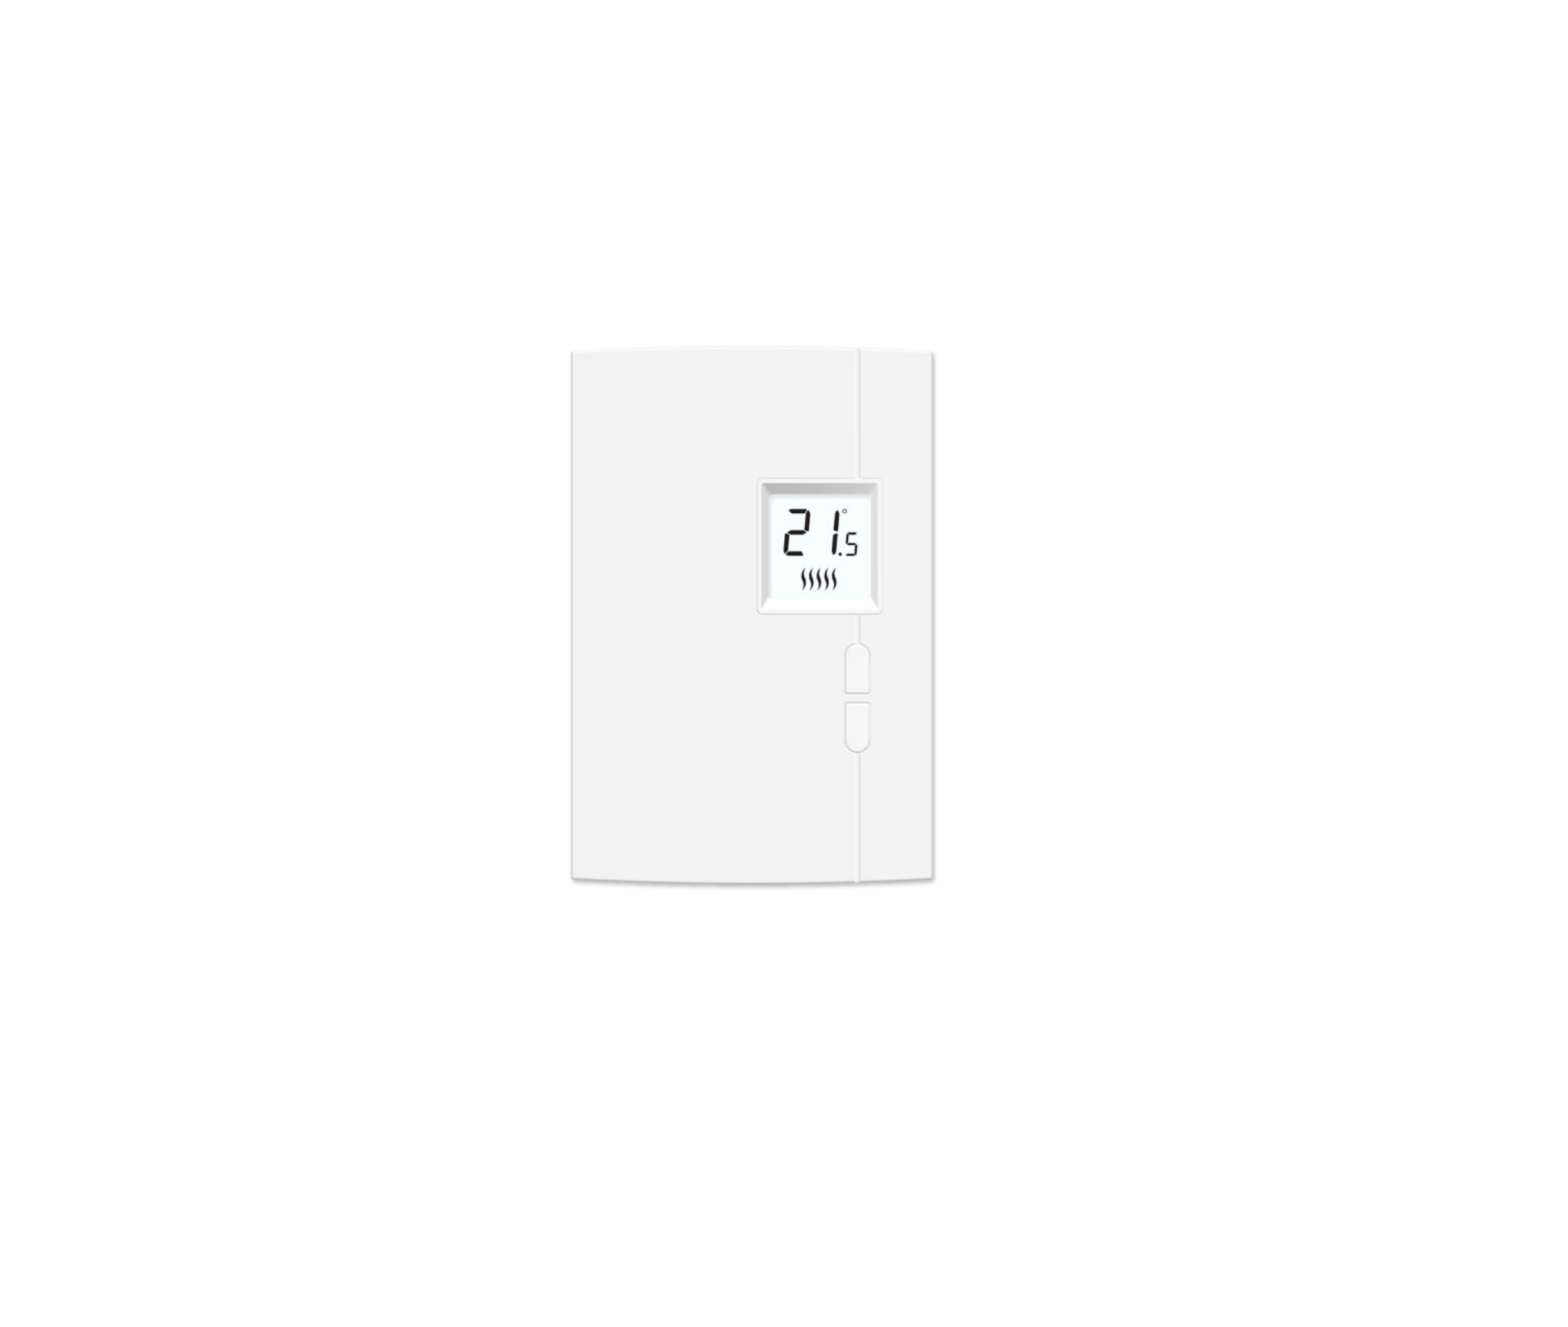 Honeywell Home TH401 Non-programmable Thermostat Owner’s Manual